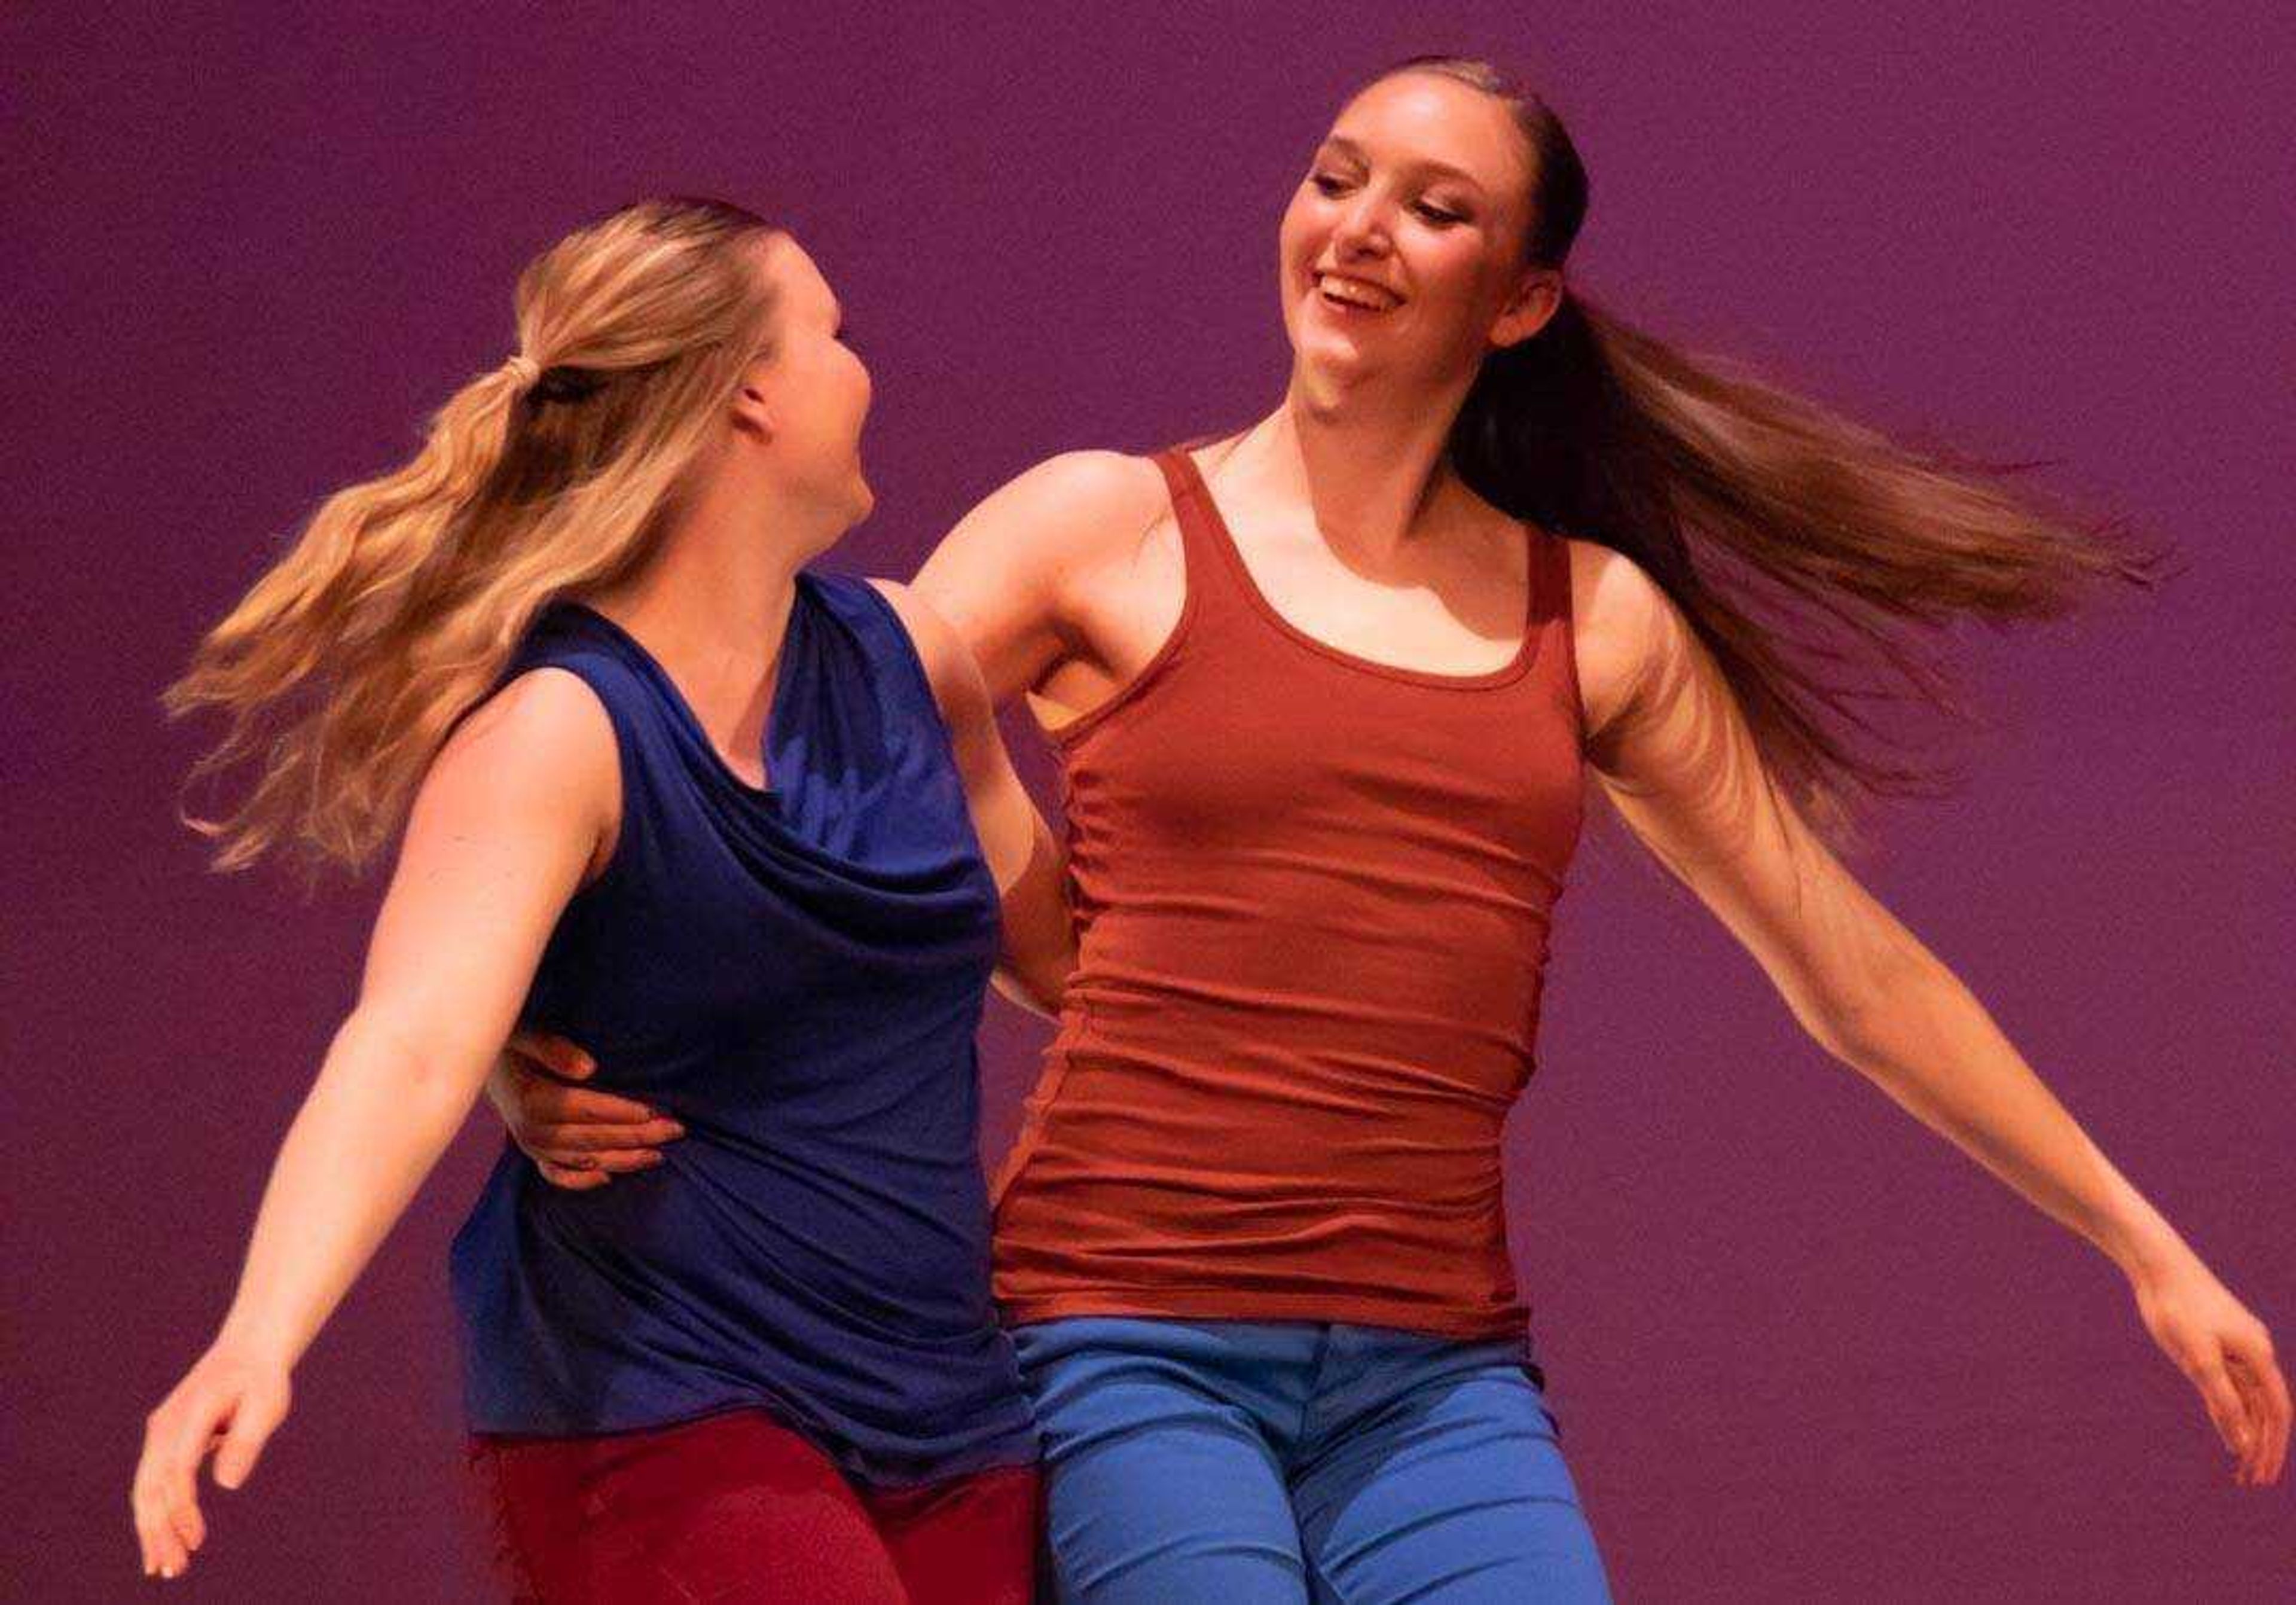 Junior Chloe Galovich (left) and freshman Bailey Bremer smile at each other during "You Go, I Go," choreographed by guest artist Autumn Eckman, during a Spring into Dance dress rehearsal.